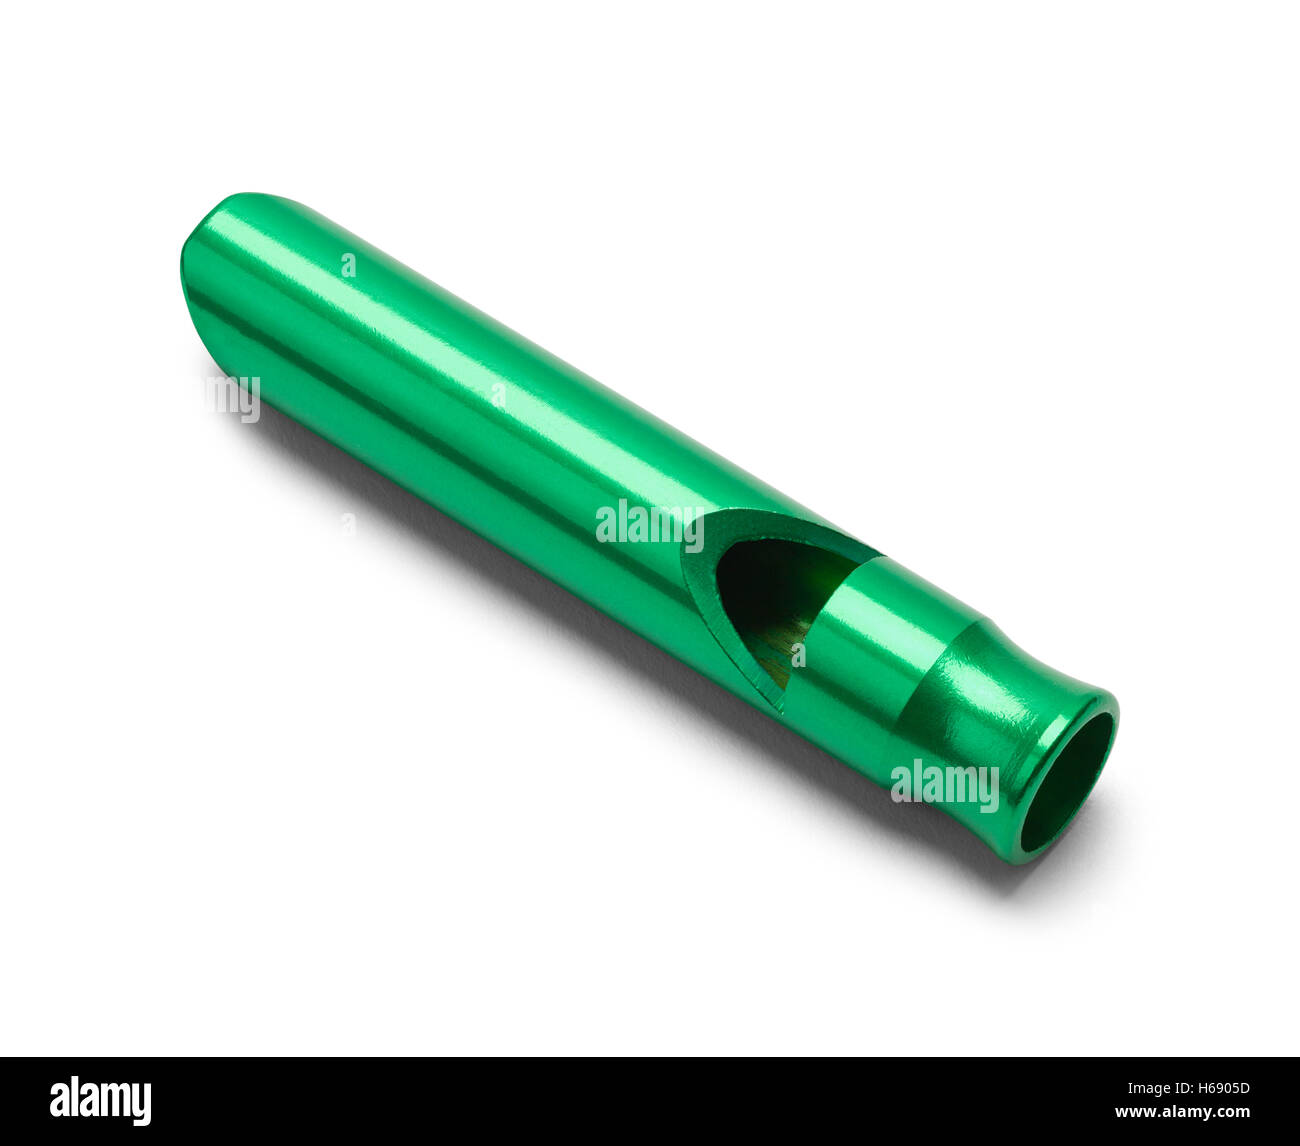 Metal Green Whistle Isolated on White Background. Stock Photo